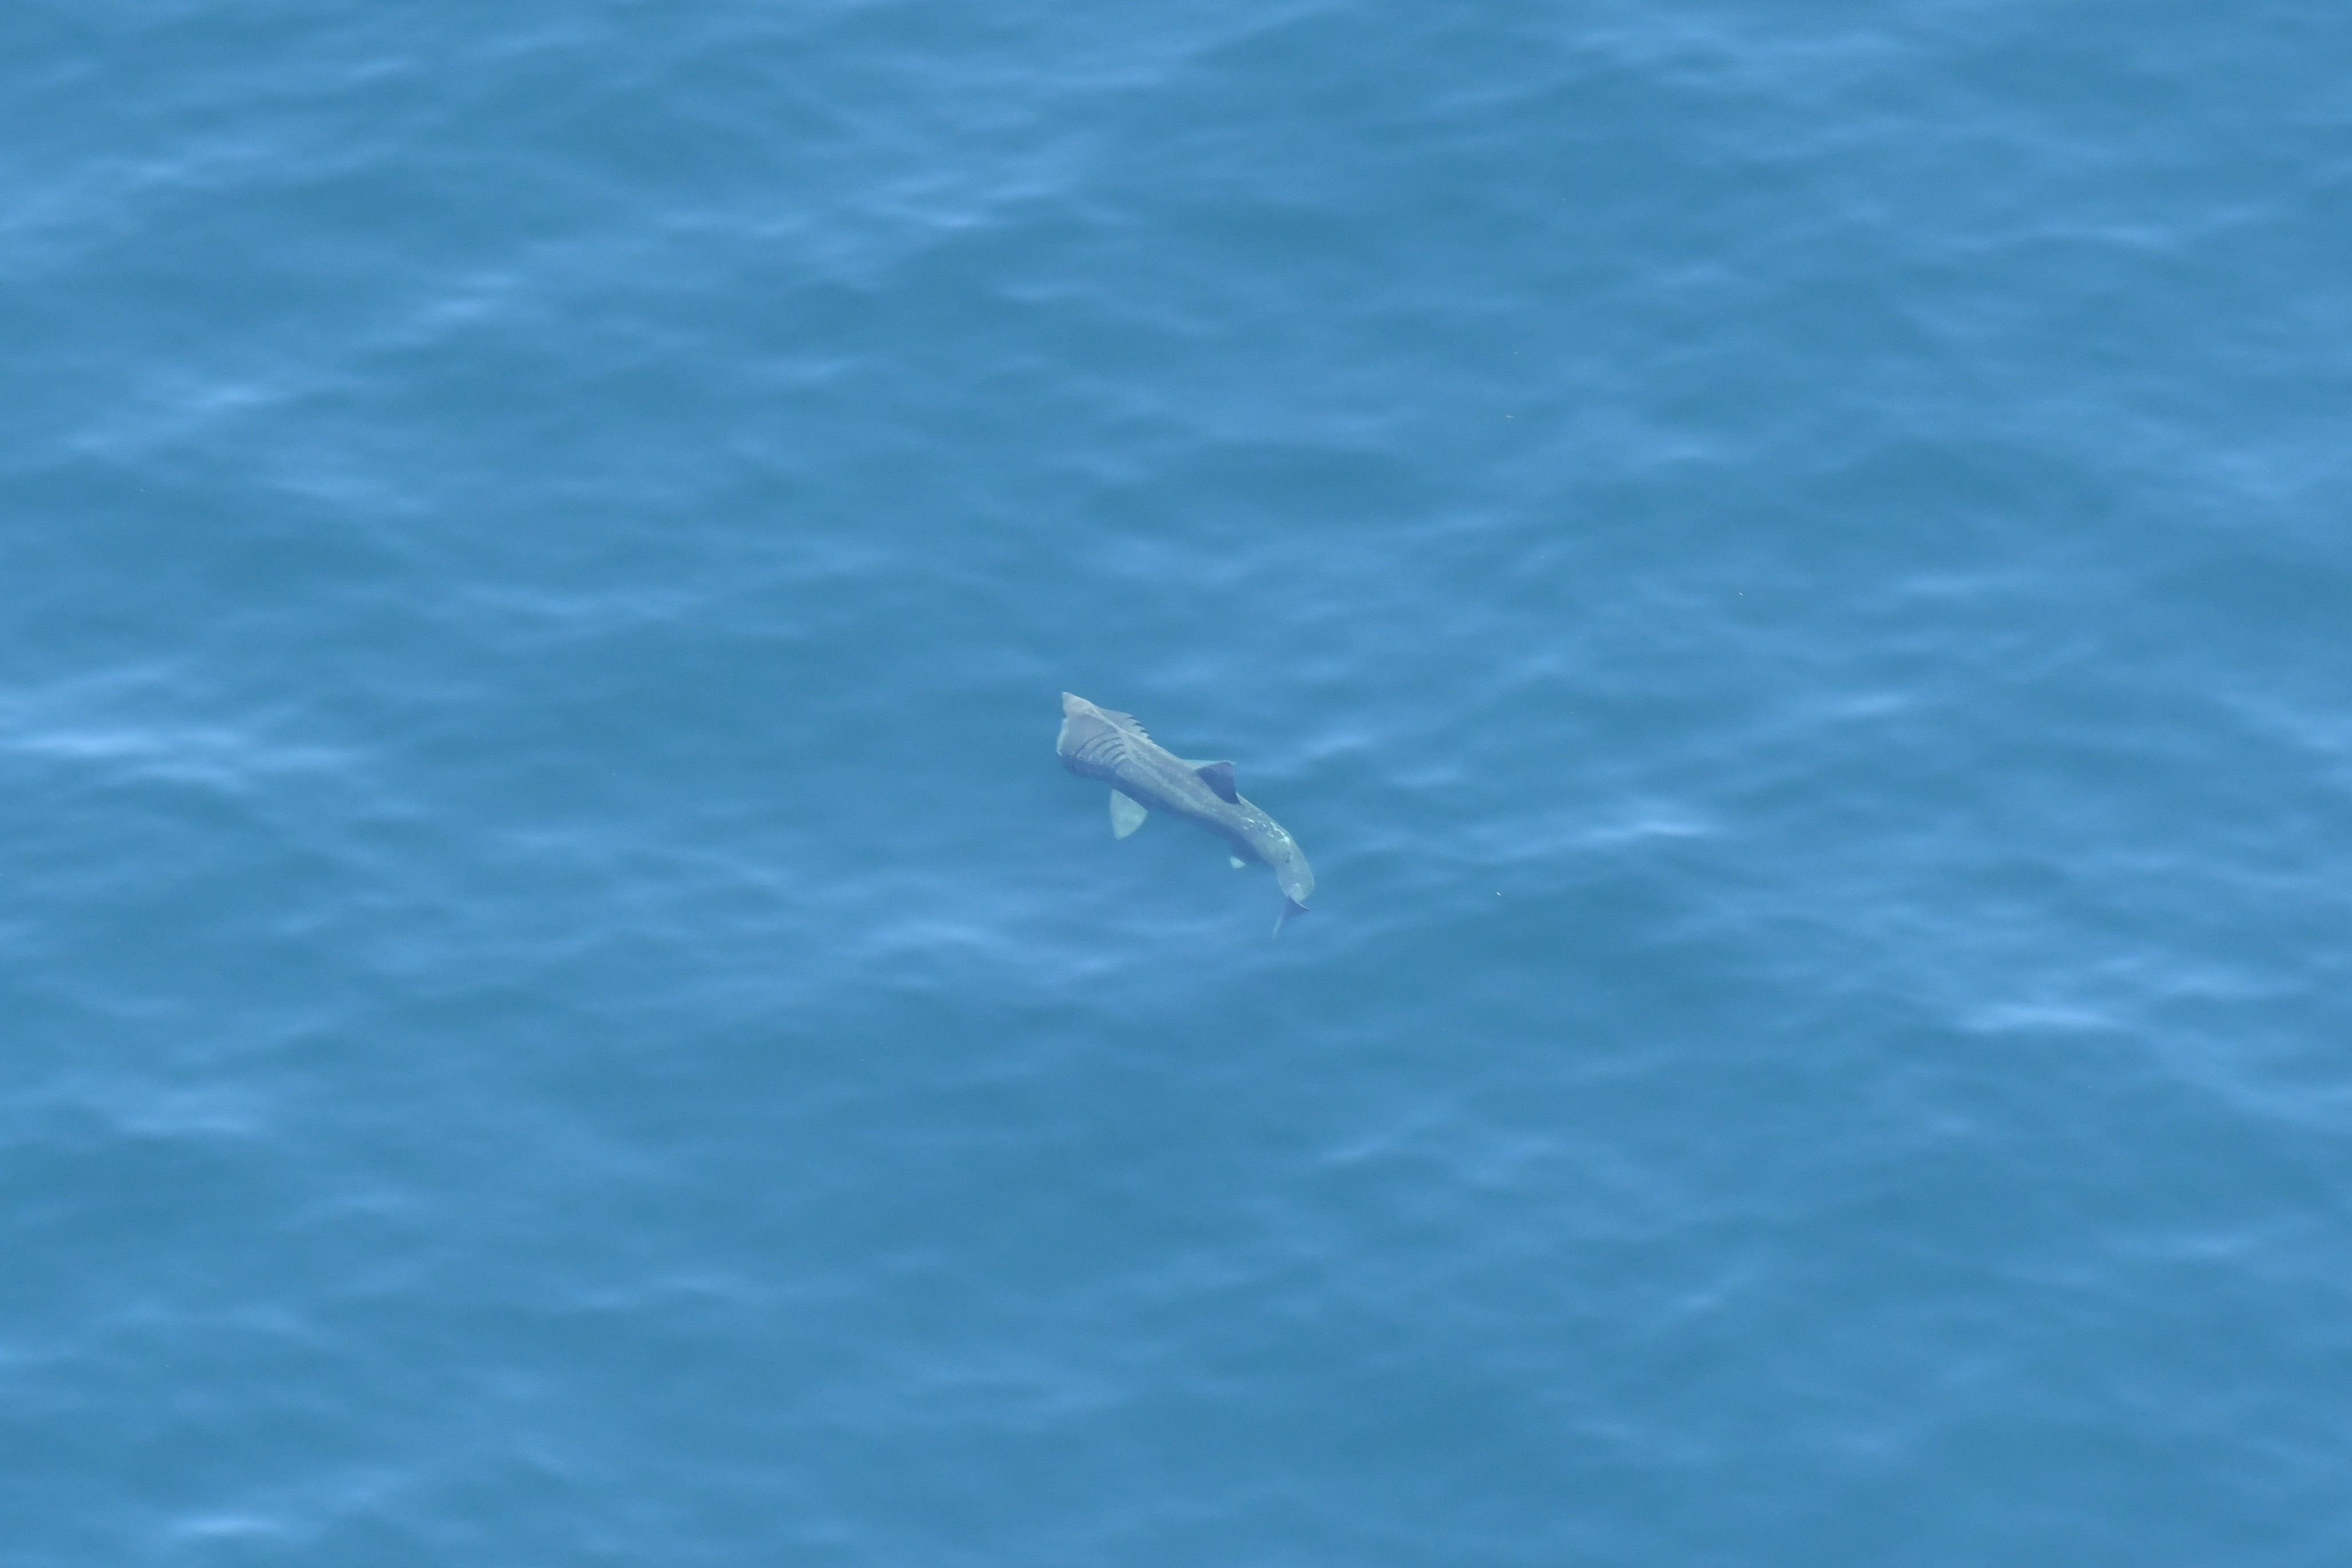 An image of a basking shark taken from an aerial survey plane. The shark is grey in the blue water, and it is swimming with its mouth open.